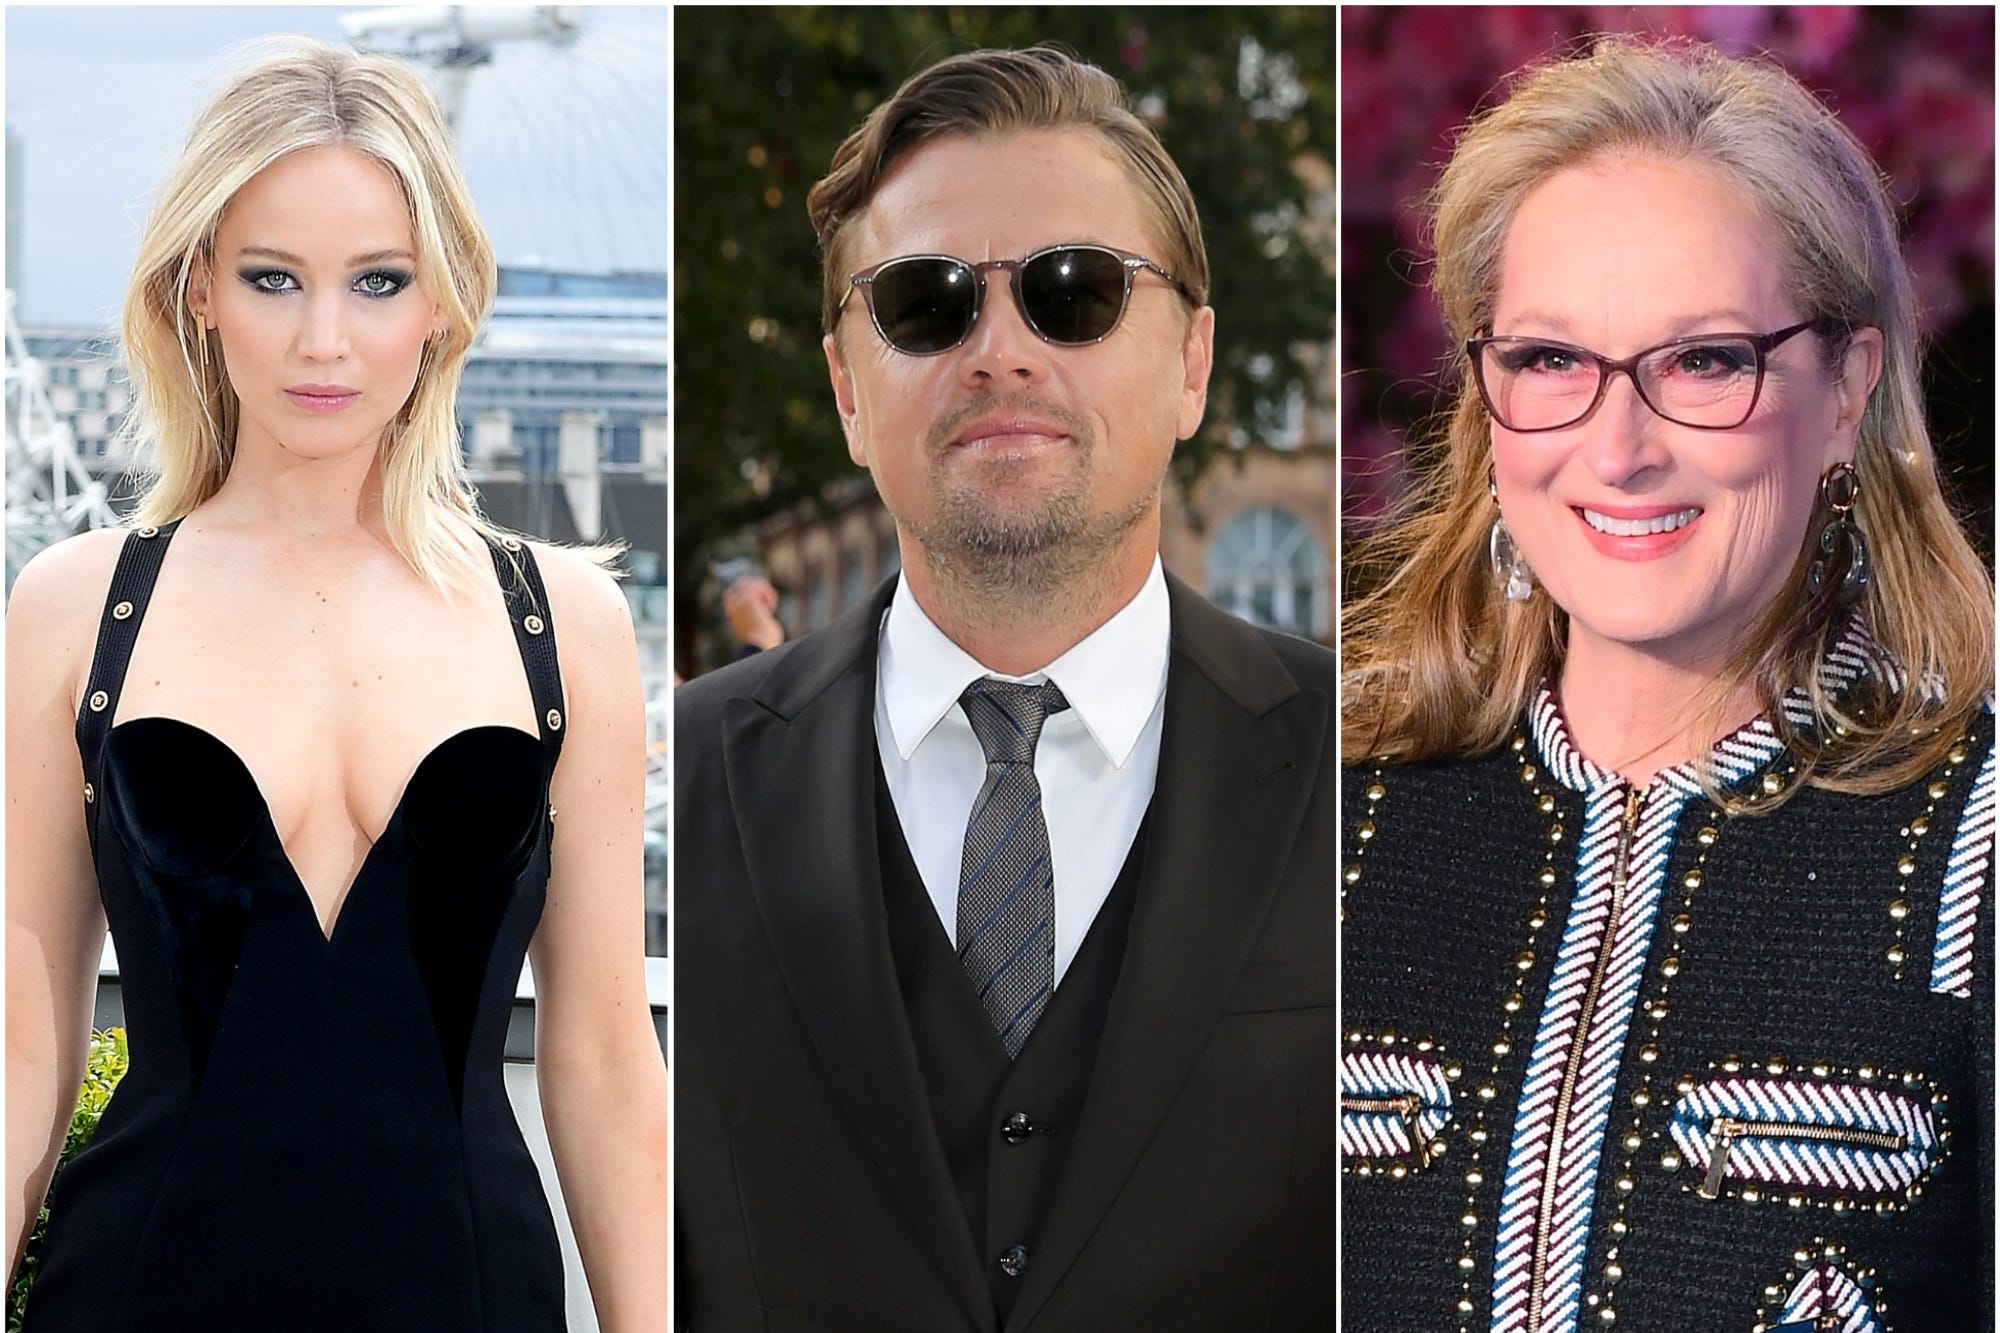 Leonardo DiCaprio among star-studded cast for Netflix's Don't Look Up | The Leader